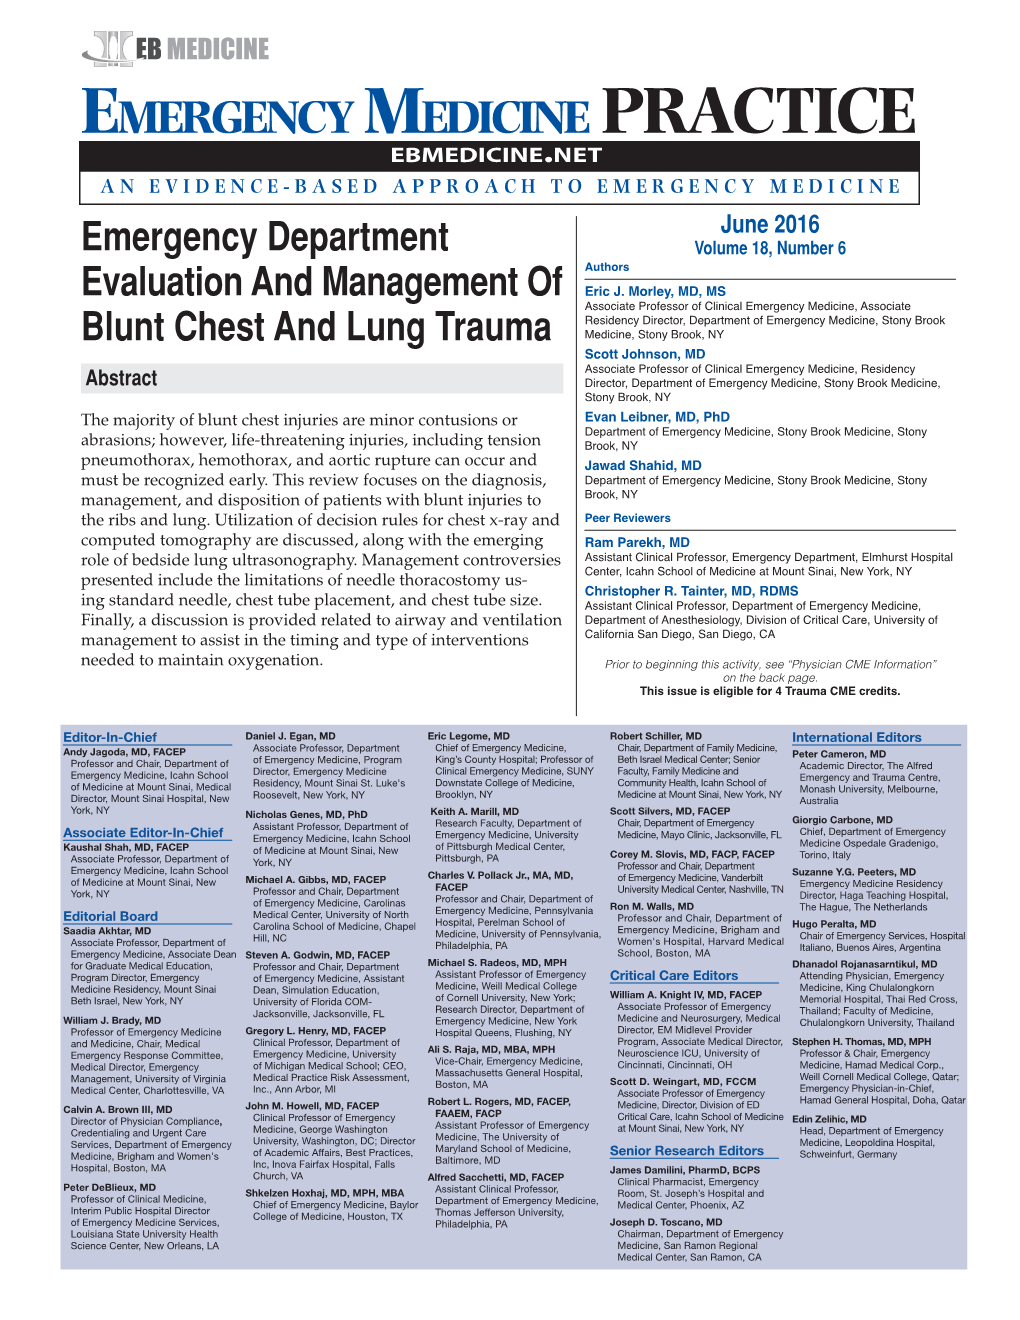 Emergency Department Evaluation and Management of Blunt Chest